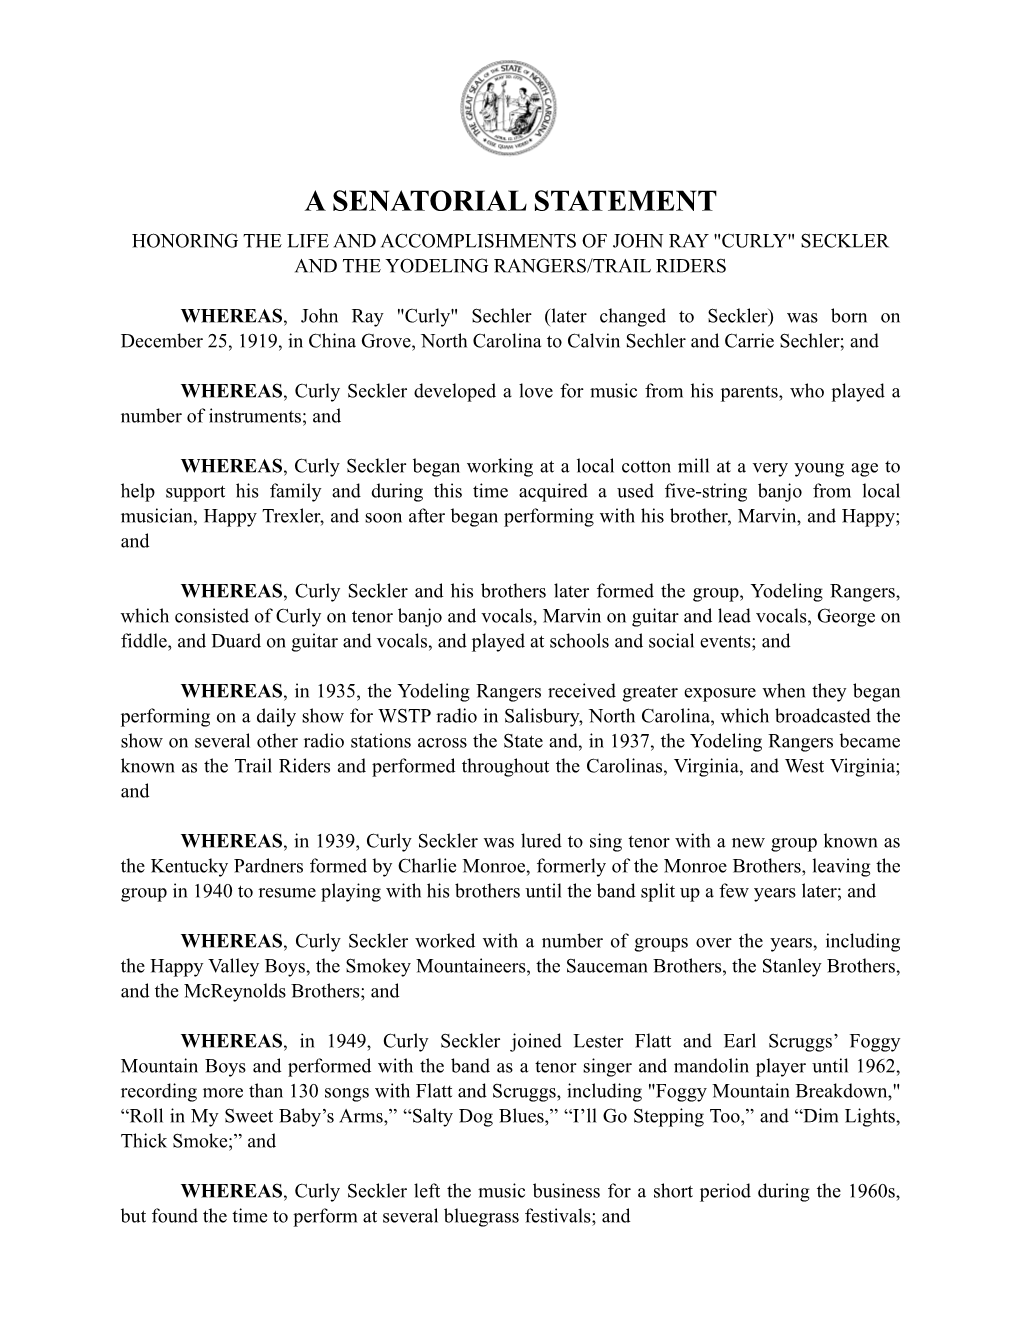 A Senatorial Statement Honoring the Life and Accomplishments of John Ray "Curly" Seckler and the Yodeling Rangers/Trail Riders